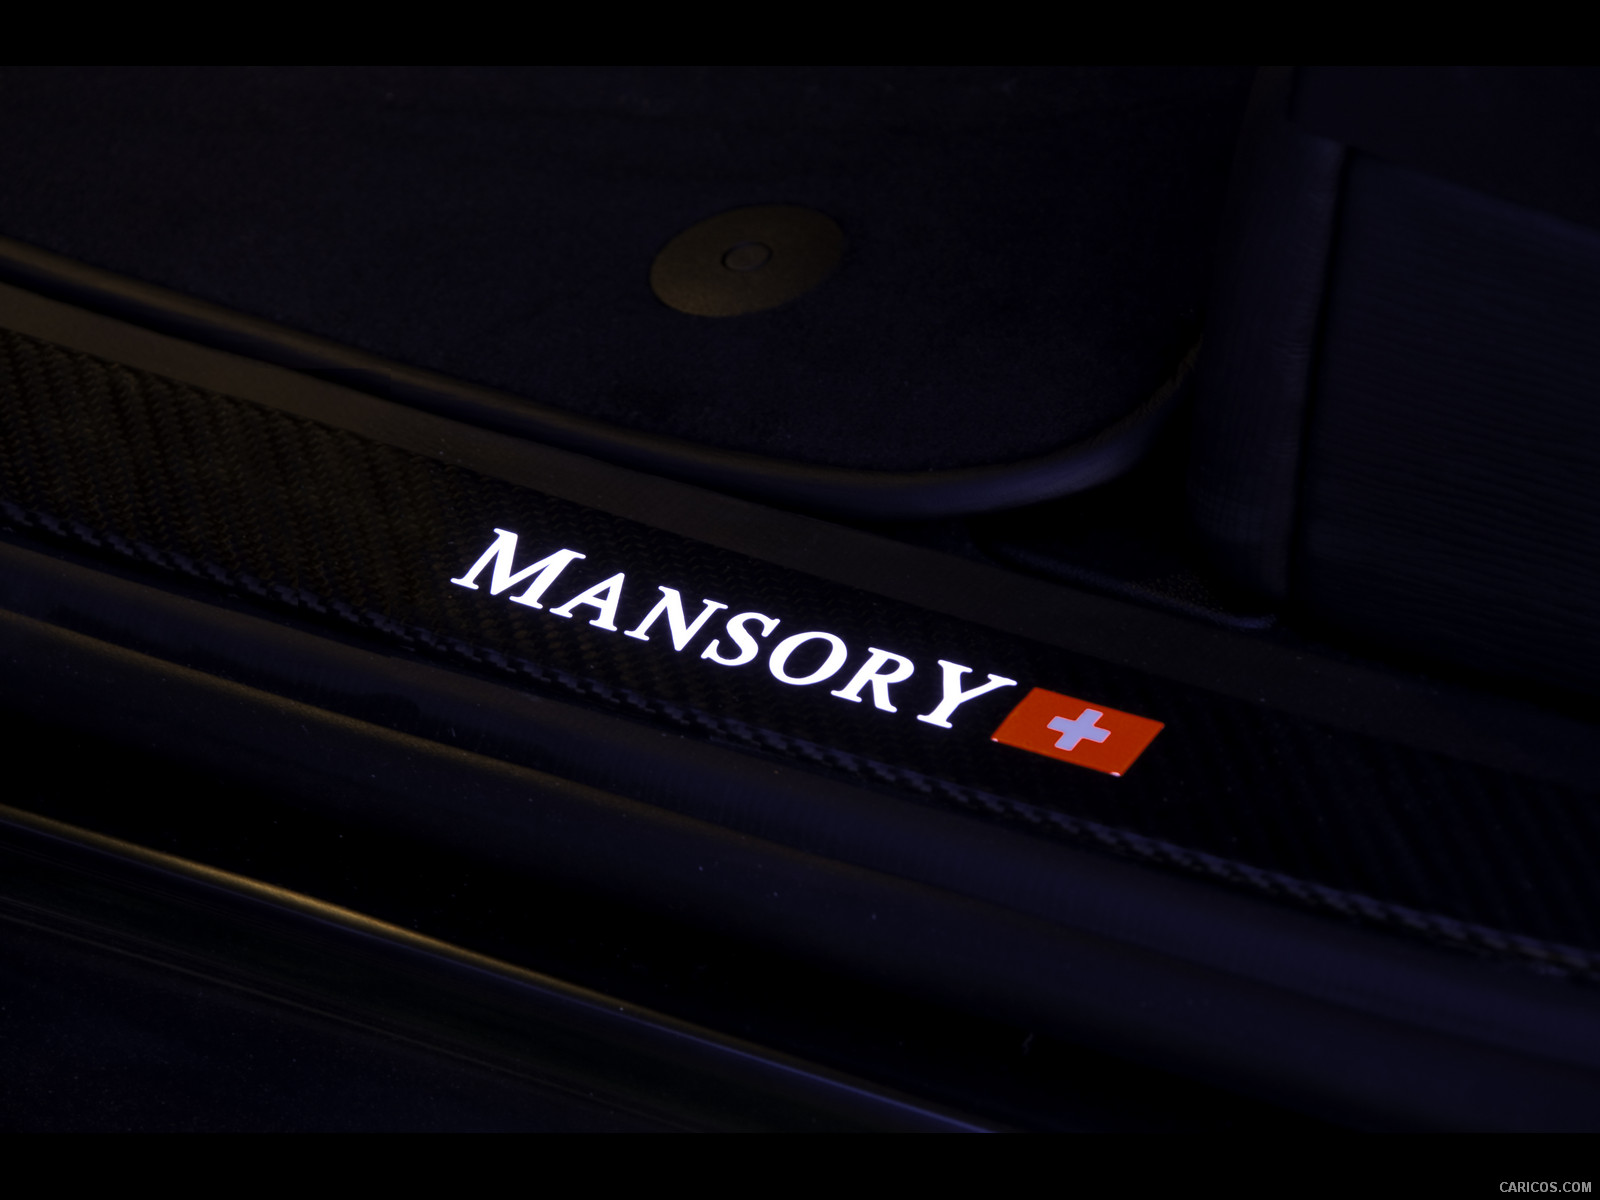 2009 Mansory Chopster based on Porsche Cayenne Turbo S  - Interior Detail, #36 of 38